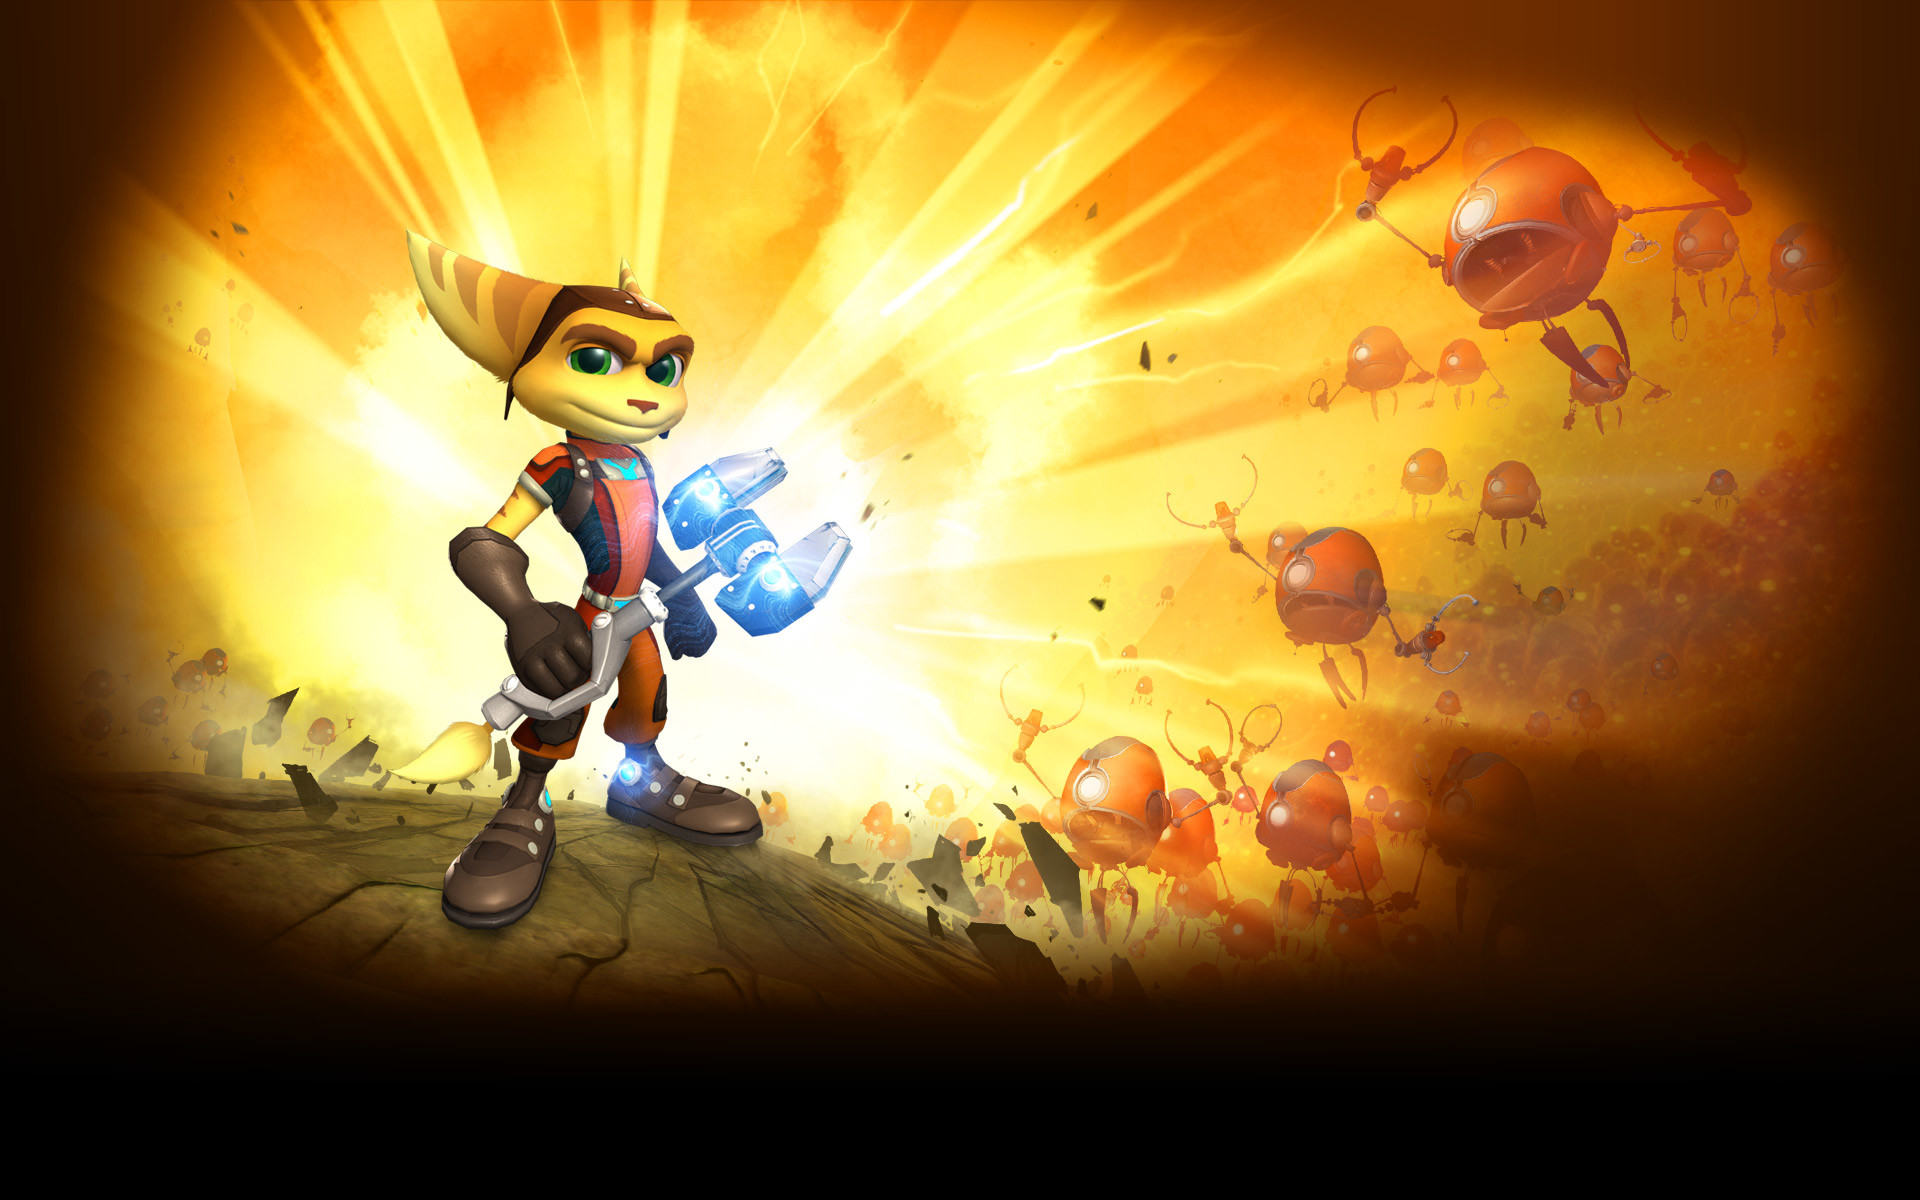 1920x1200 Ratchet and Clank images 1) Ratchet.PNG HD wallpaper and background photos